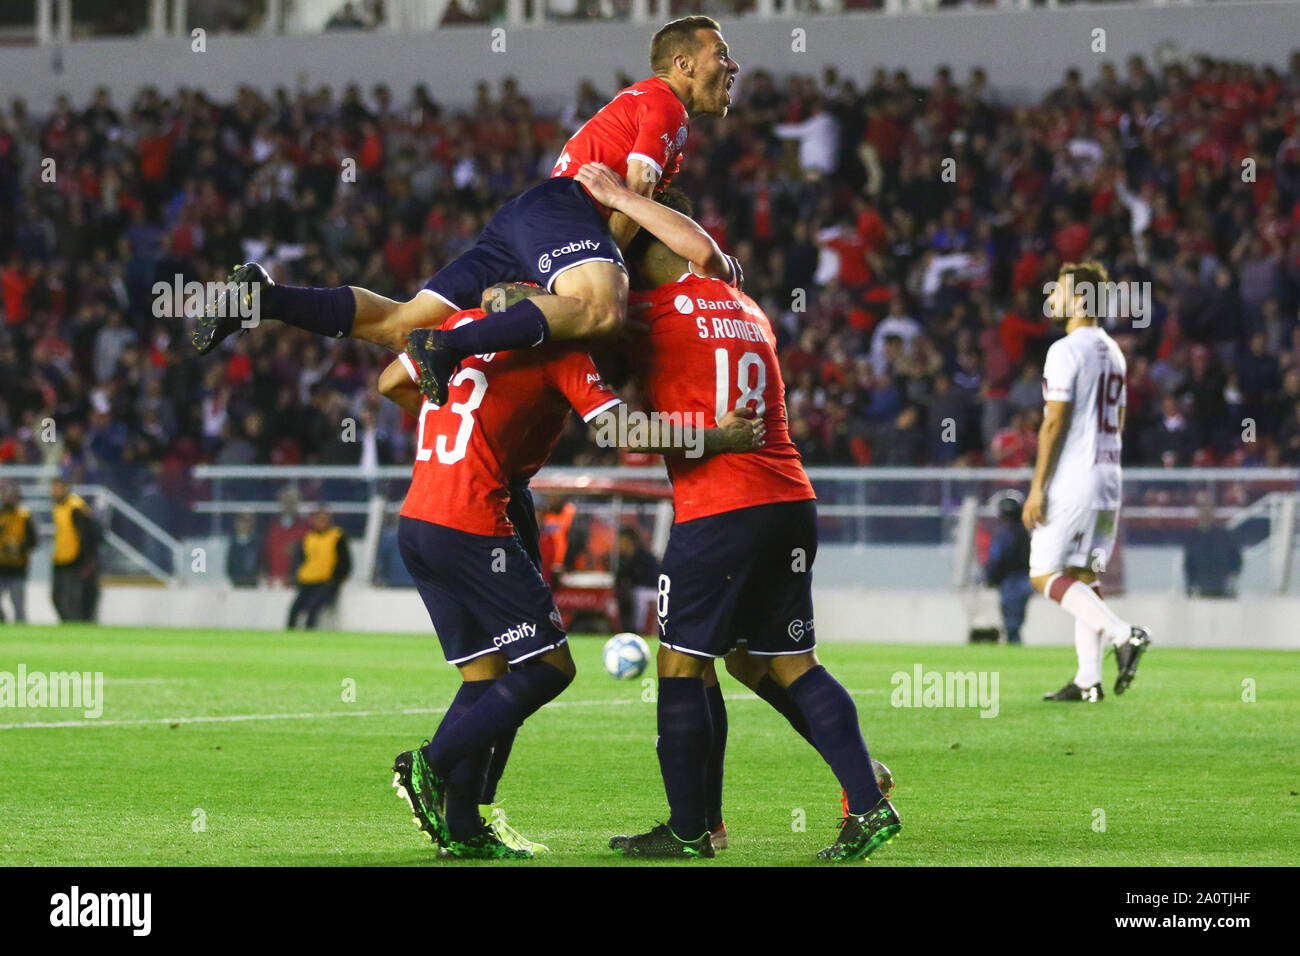 BUENOS AIRES, 14.09.2019: Nicolas Domingo over the top and some players of Independiente celebrating the goal during the match between Independiente a Stock Photo